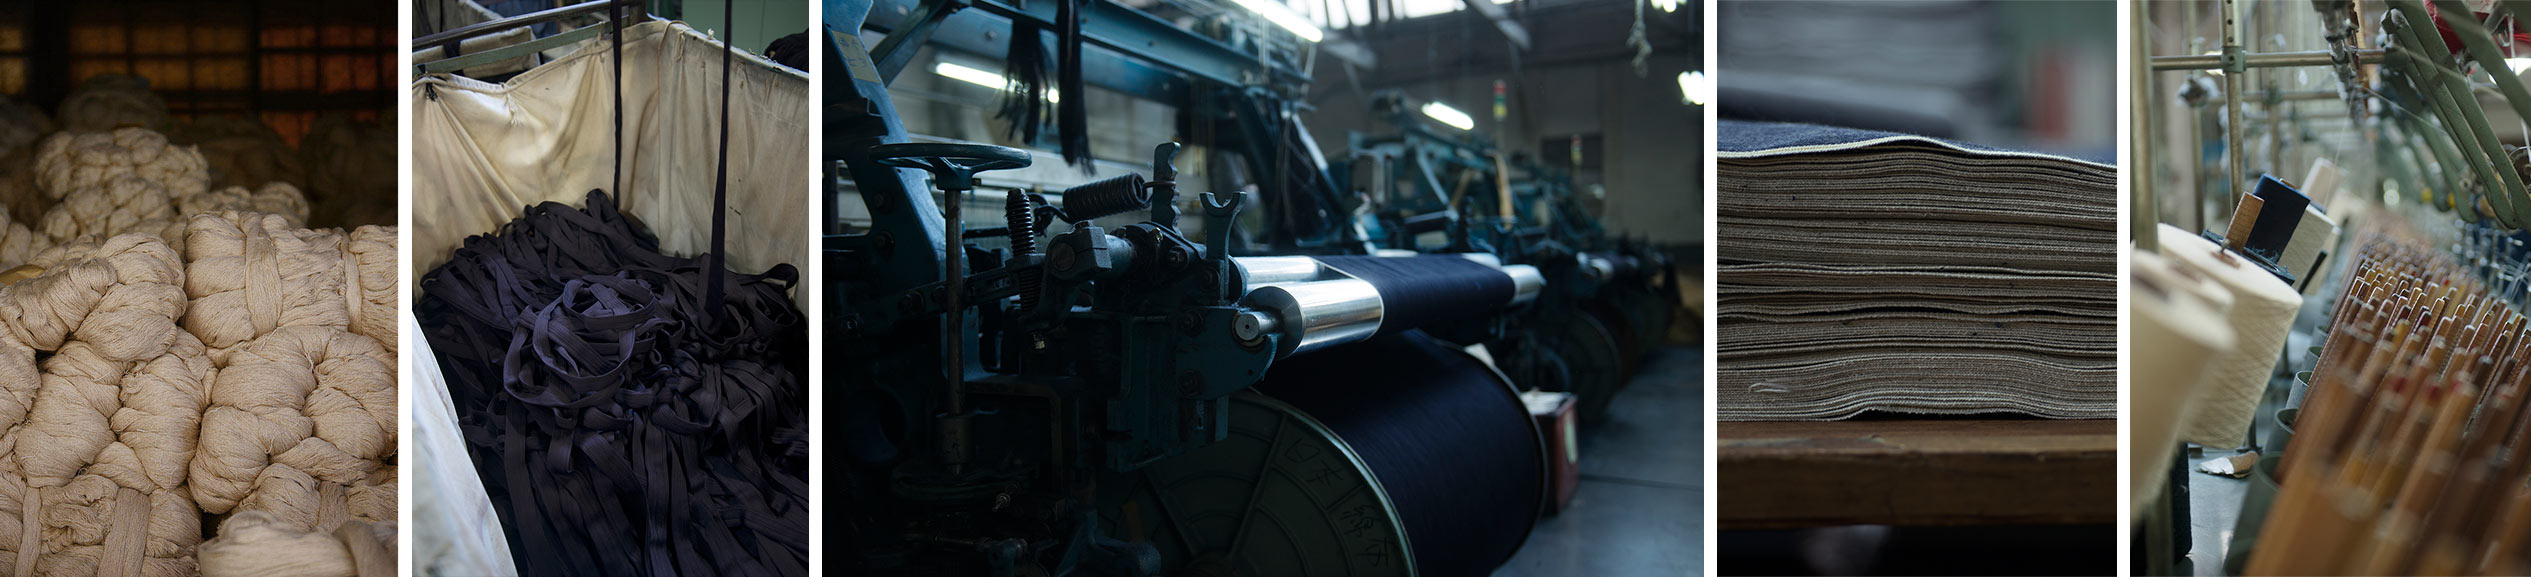                             Premium grade Tennessee cotton is woven on Japanese looms and then hand-set in California